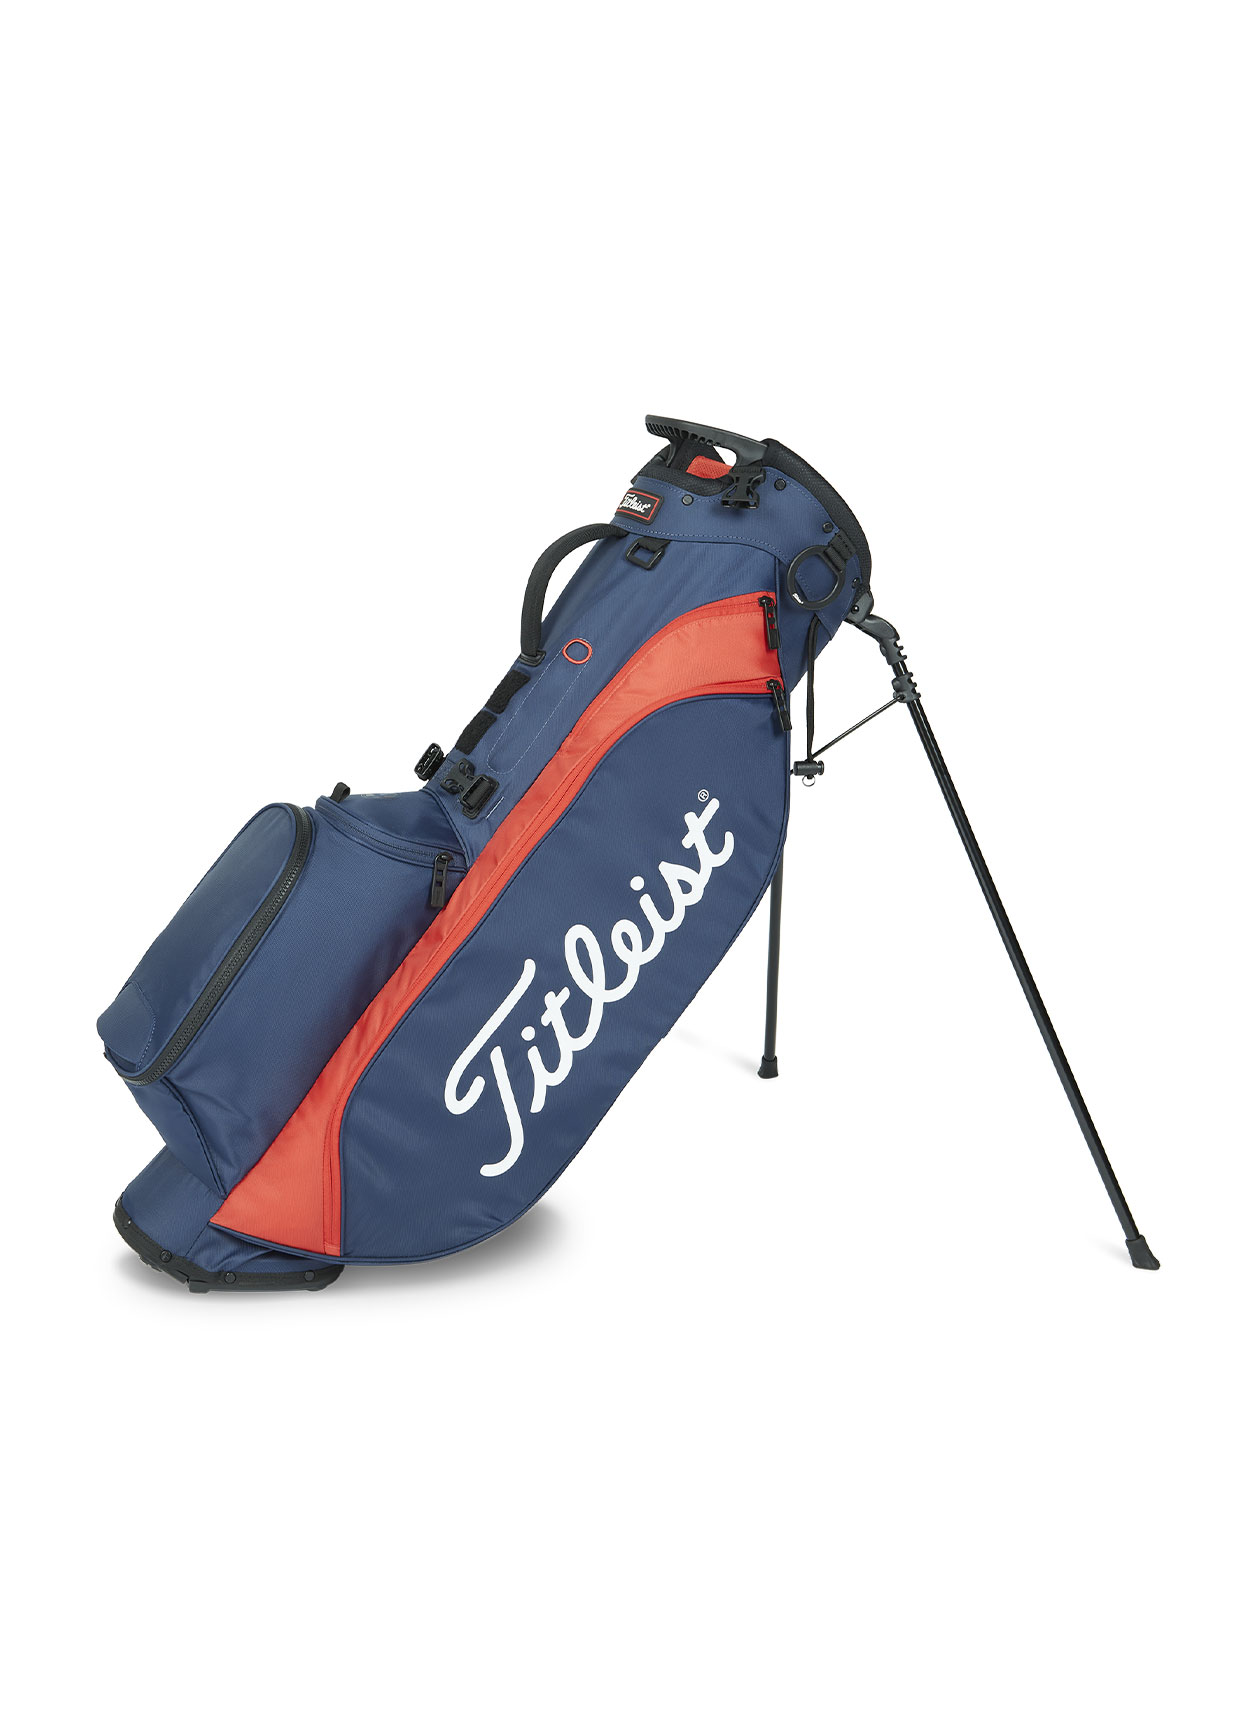 Titleist Navy/Red Players 4 Stand Bag